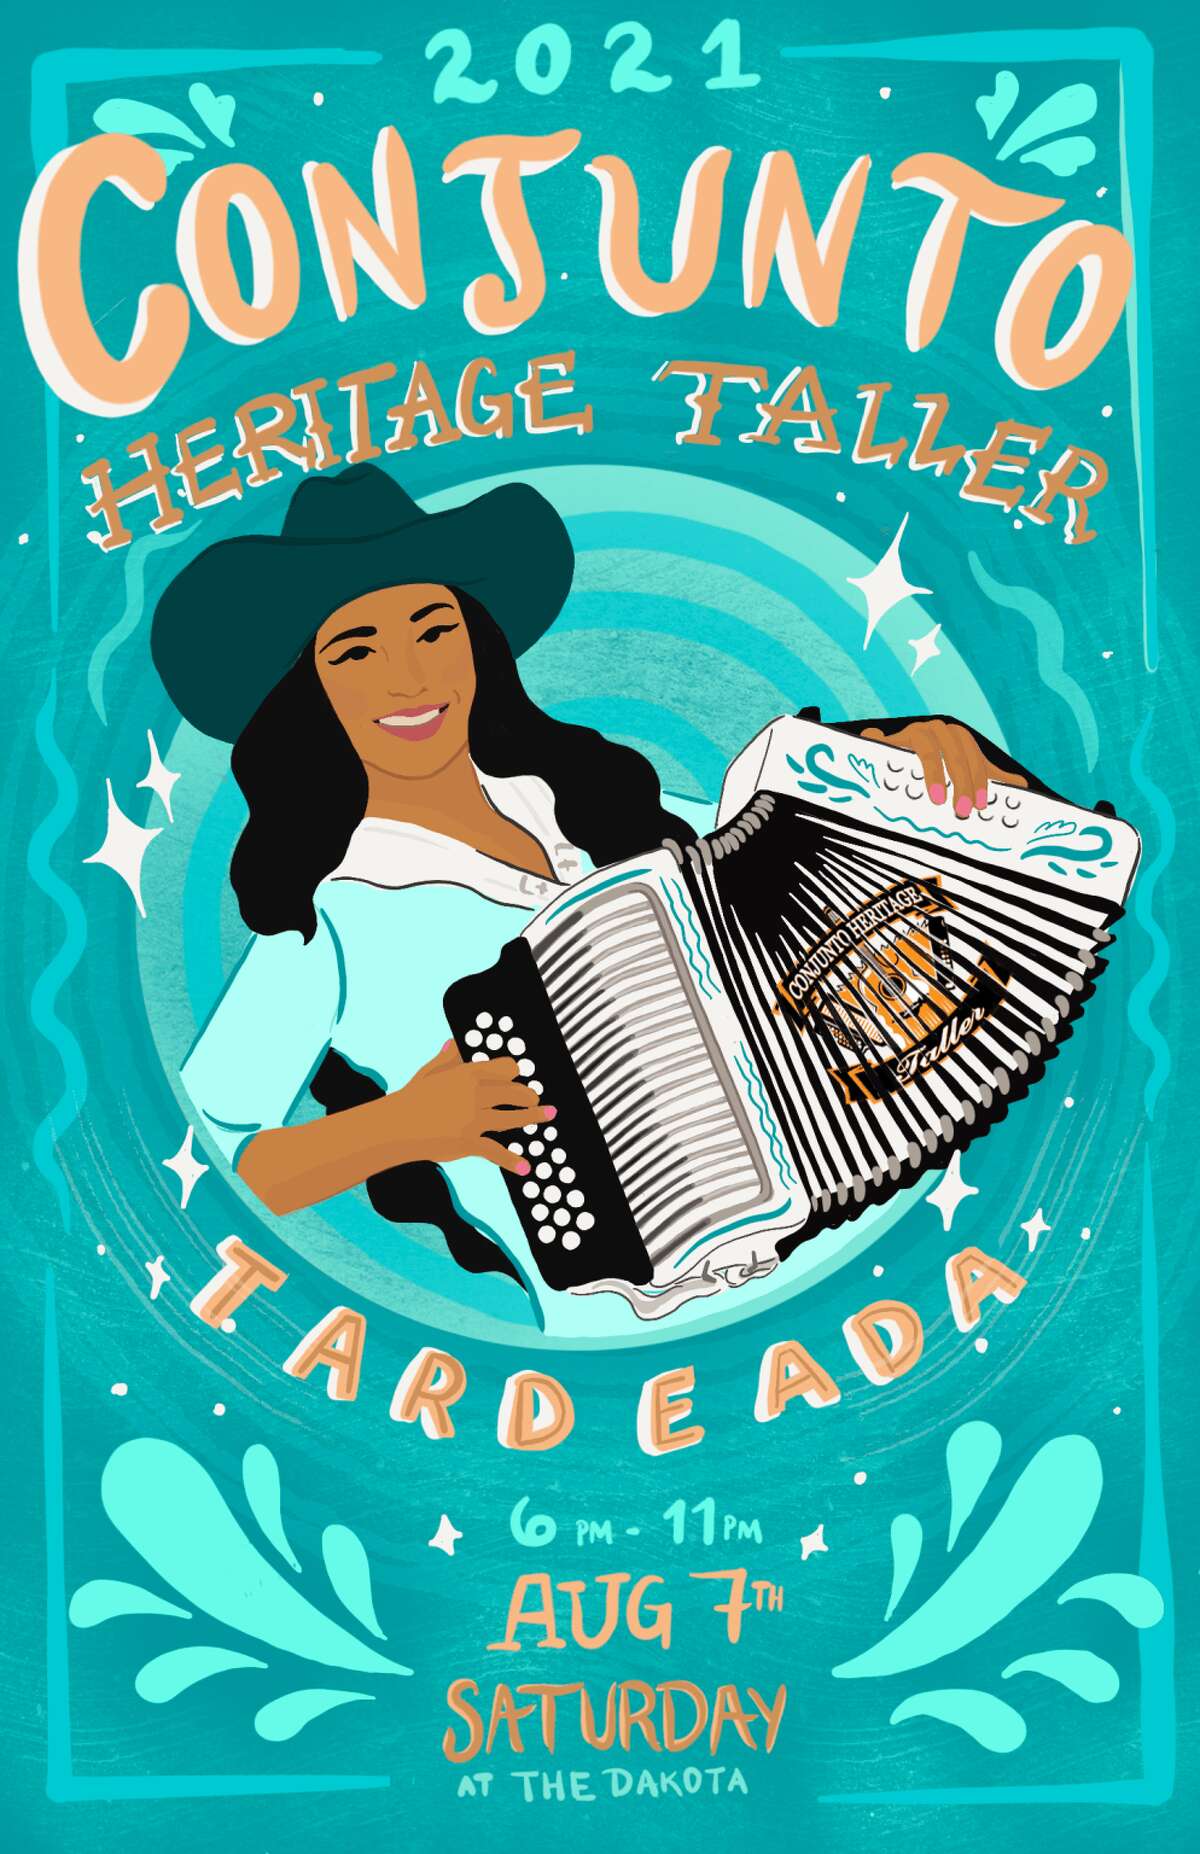 Conjunto Heritage Taller (CHT), a community organization which provides low-cost and at times free music instruction across San Antonio to preserve the tradition, is hosting the August 7 tardeada at the East Side spot to focus on the women in the industry. 